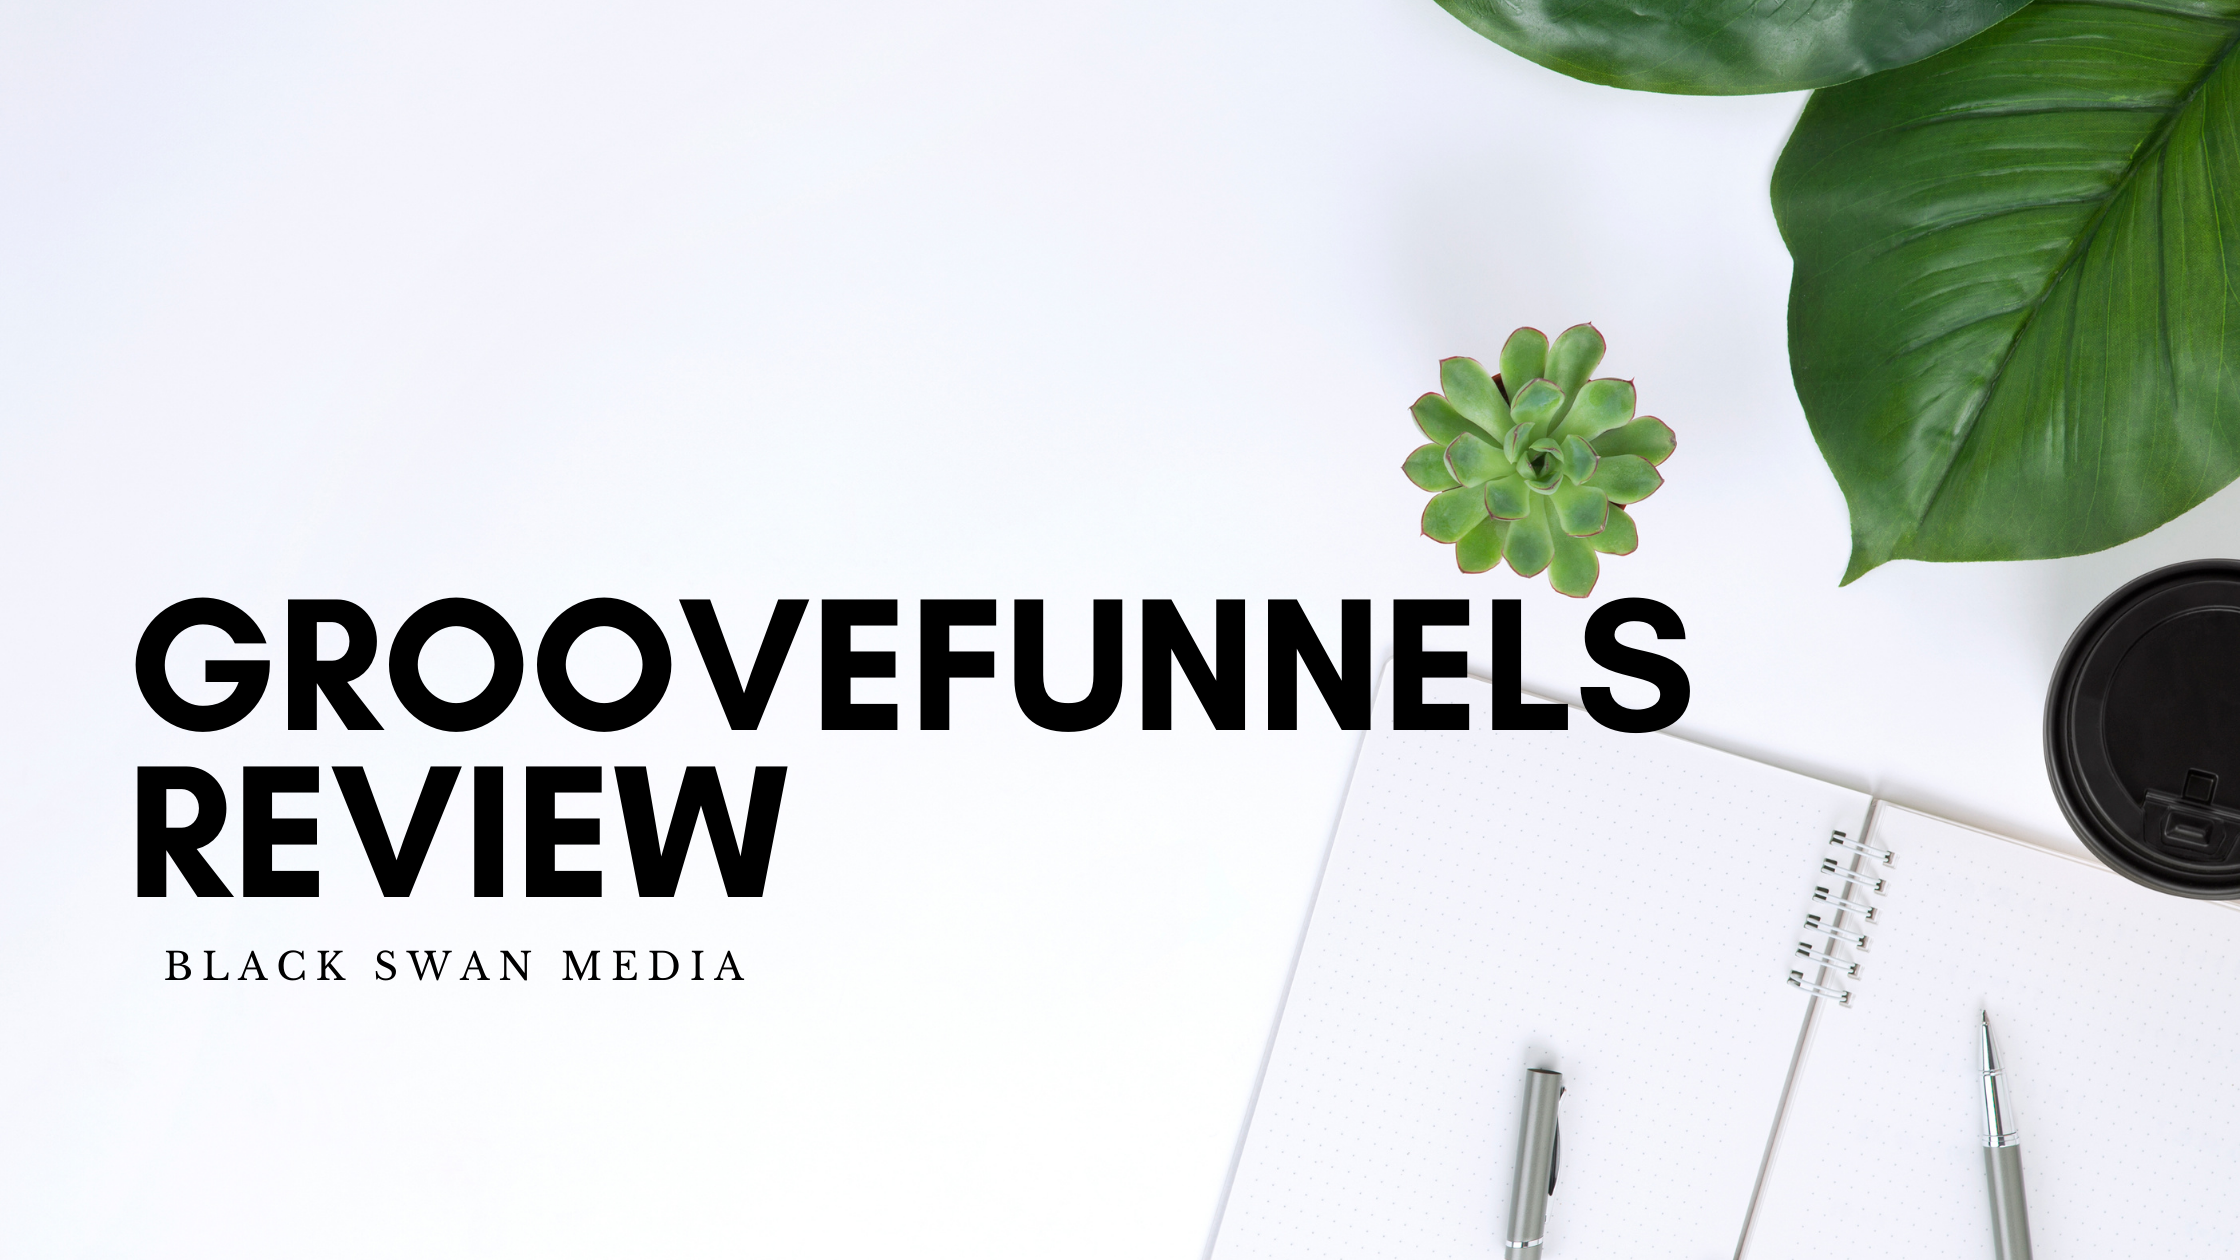 GROOVEFUNNELS REVIEW